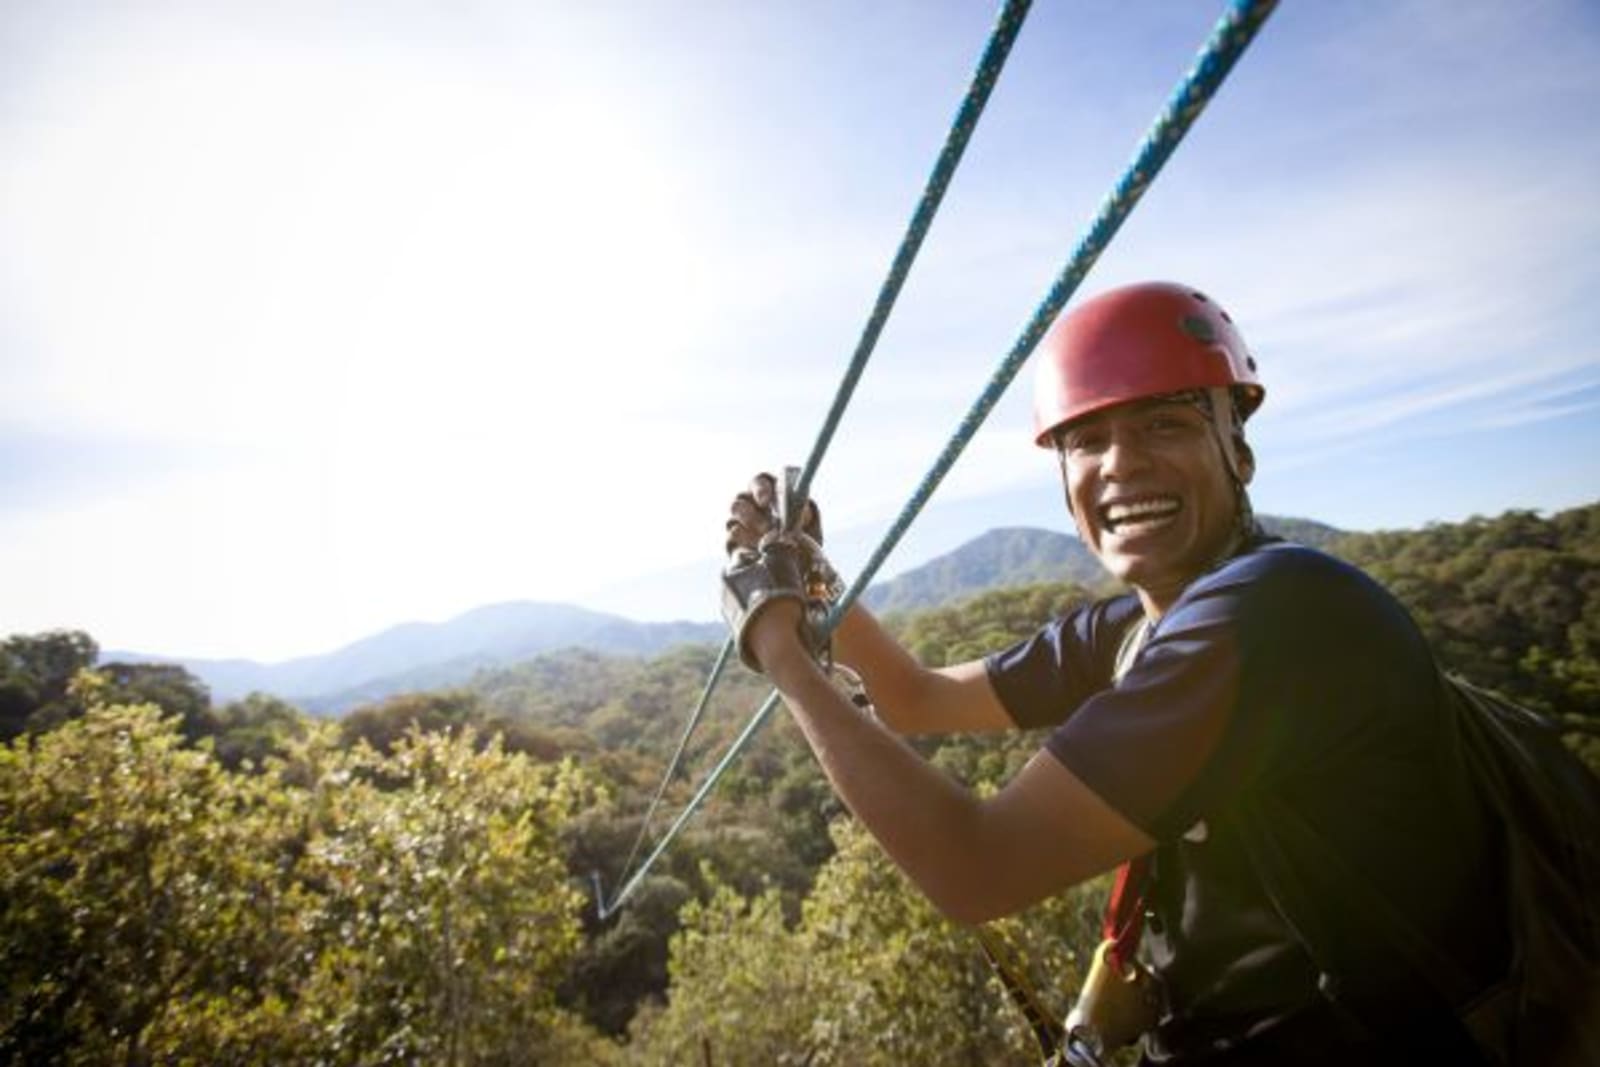 Man smiling looking back attached to a zip line